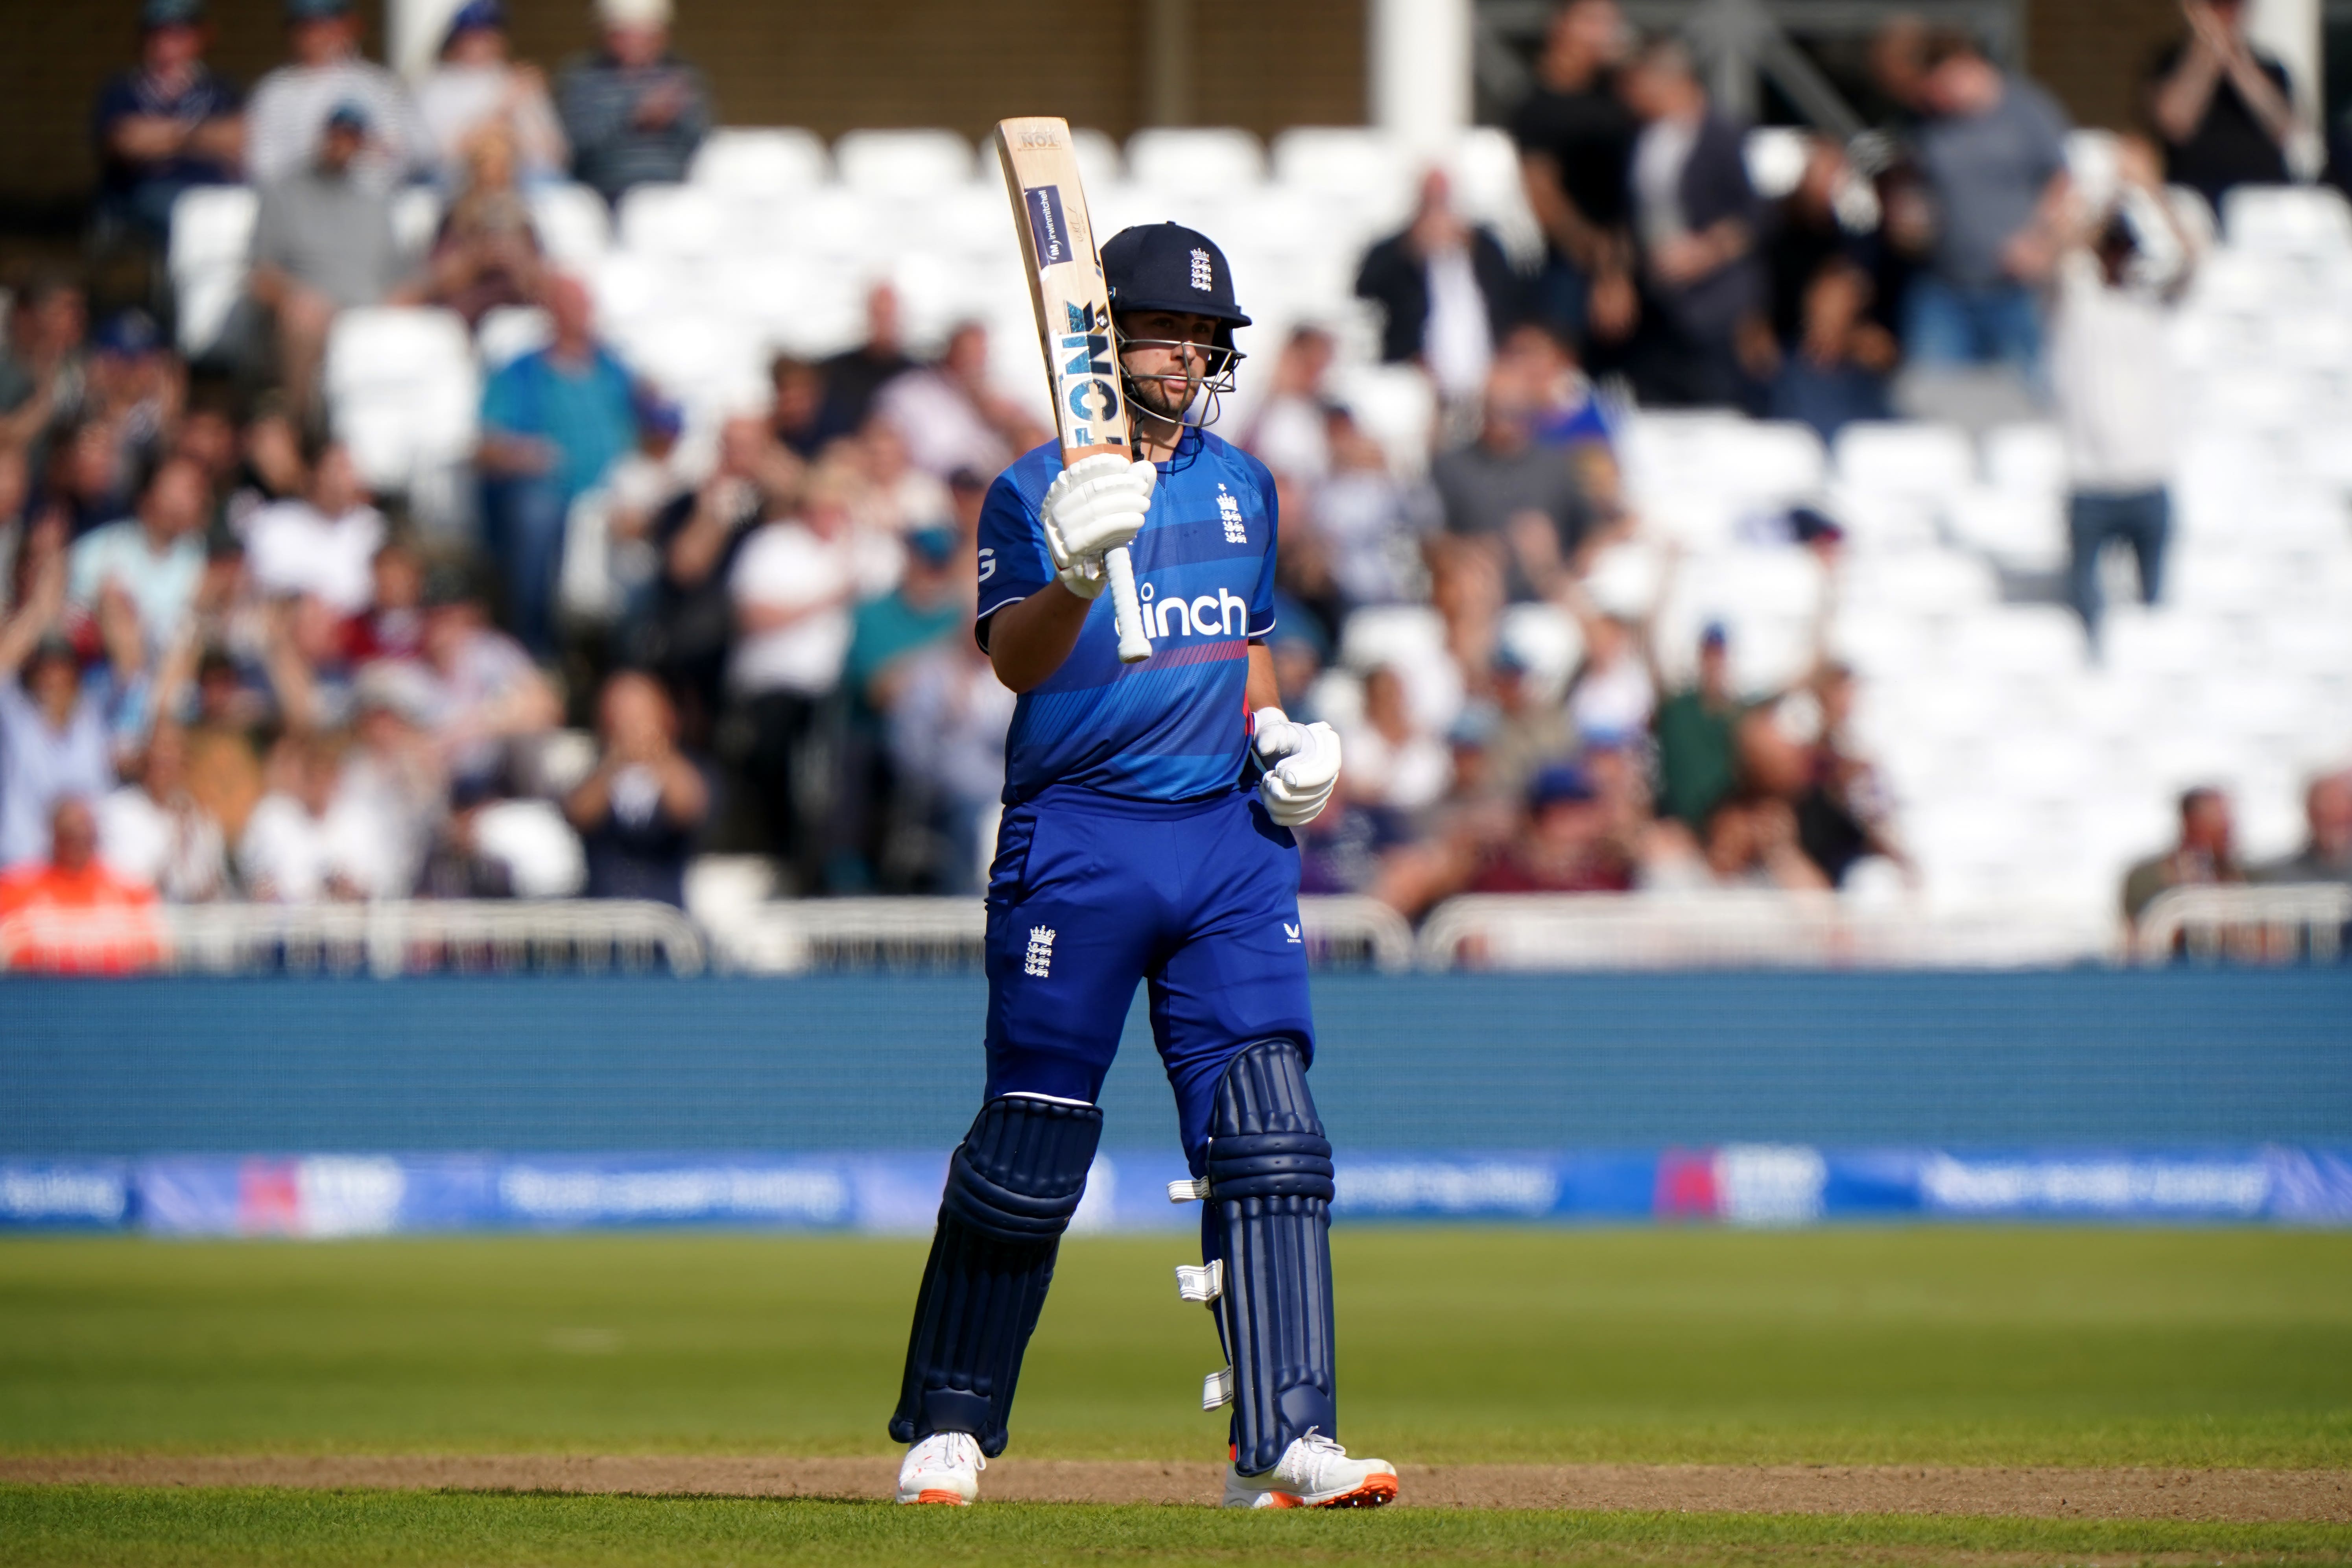 Will Jacks was close to making a century for England (Tim Goode/PA)